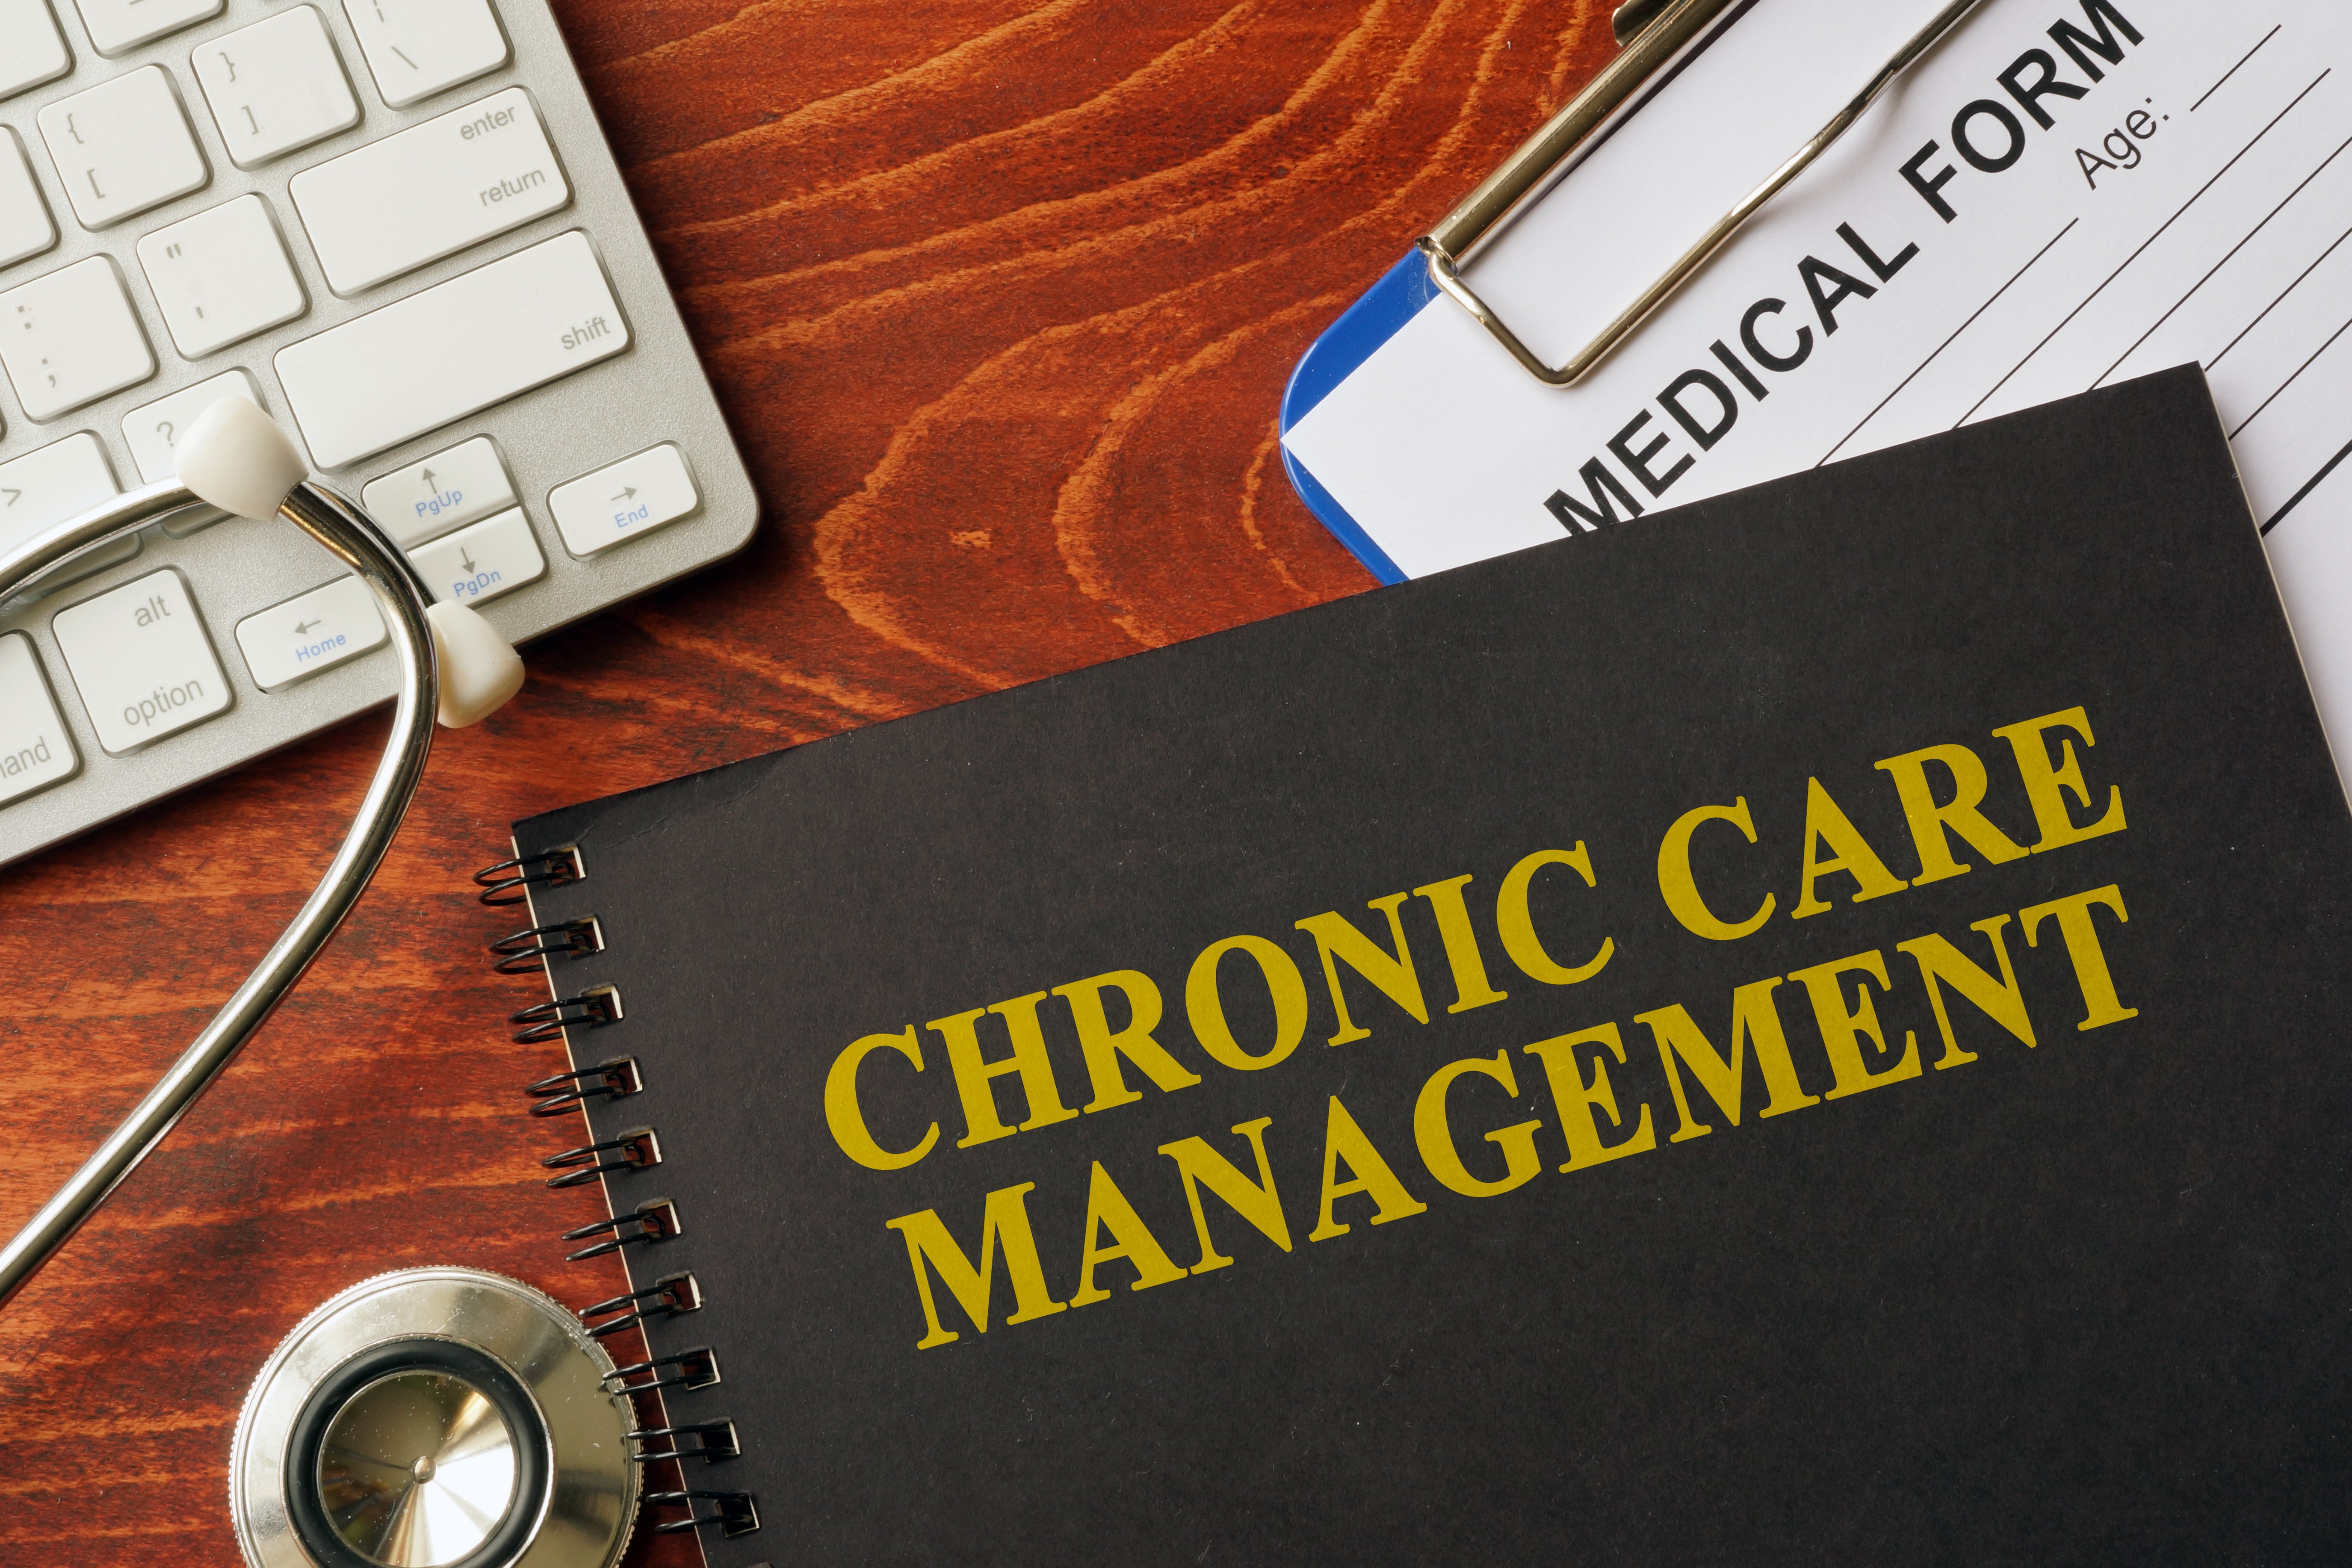 Chronic Care Management: Elements and Benefits